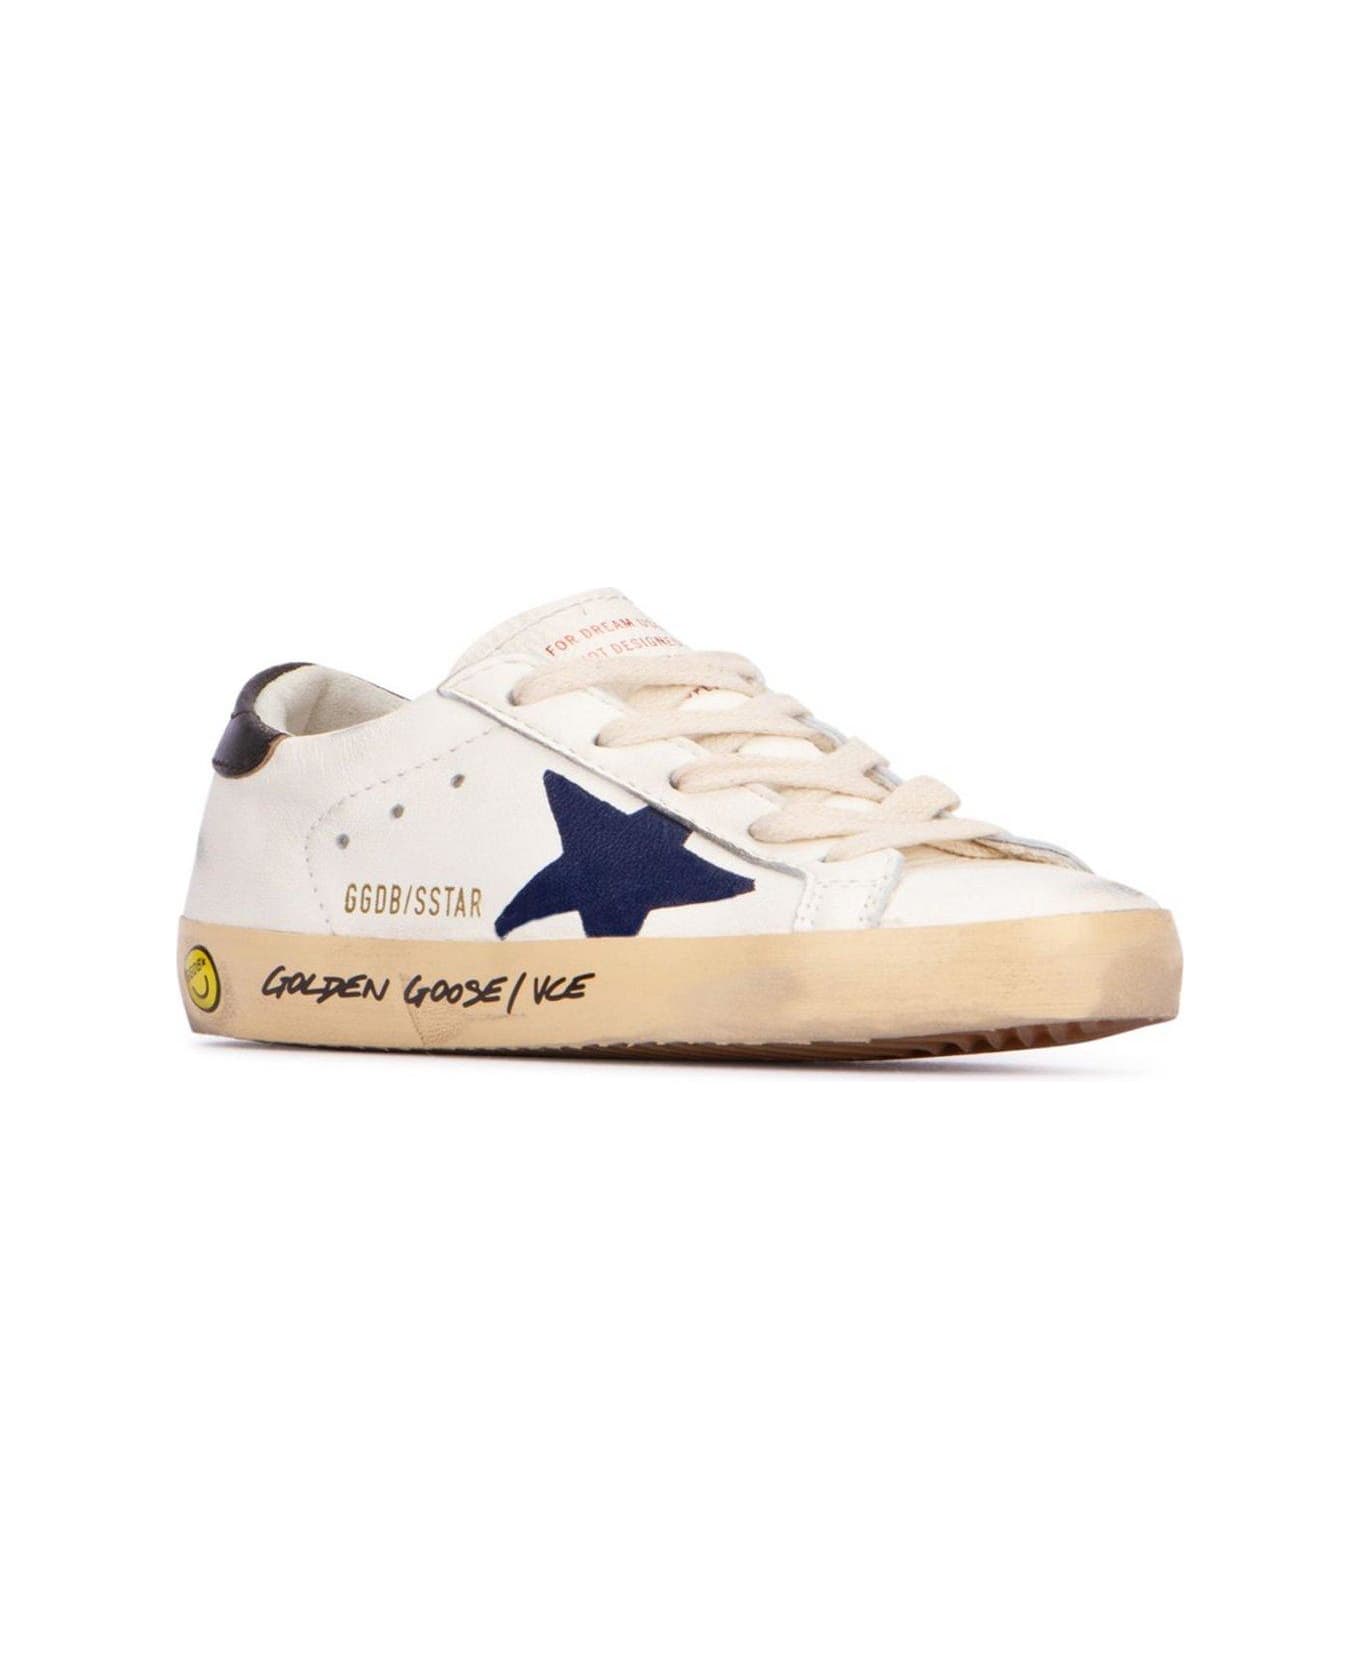 Golden Goose Superstar Lace-up Sneakers - White